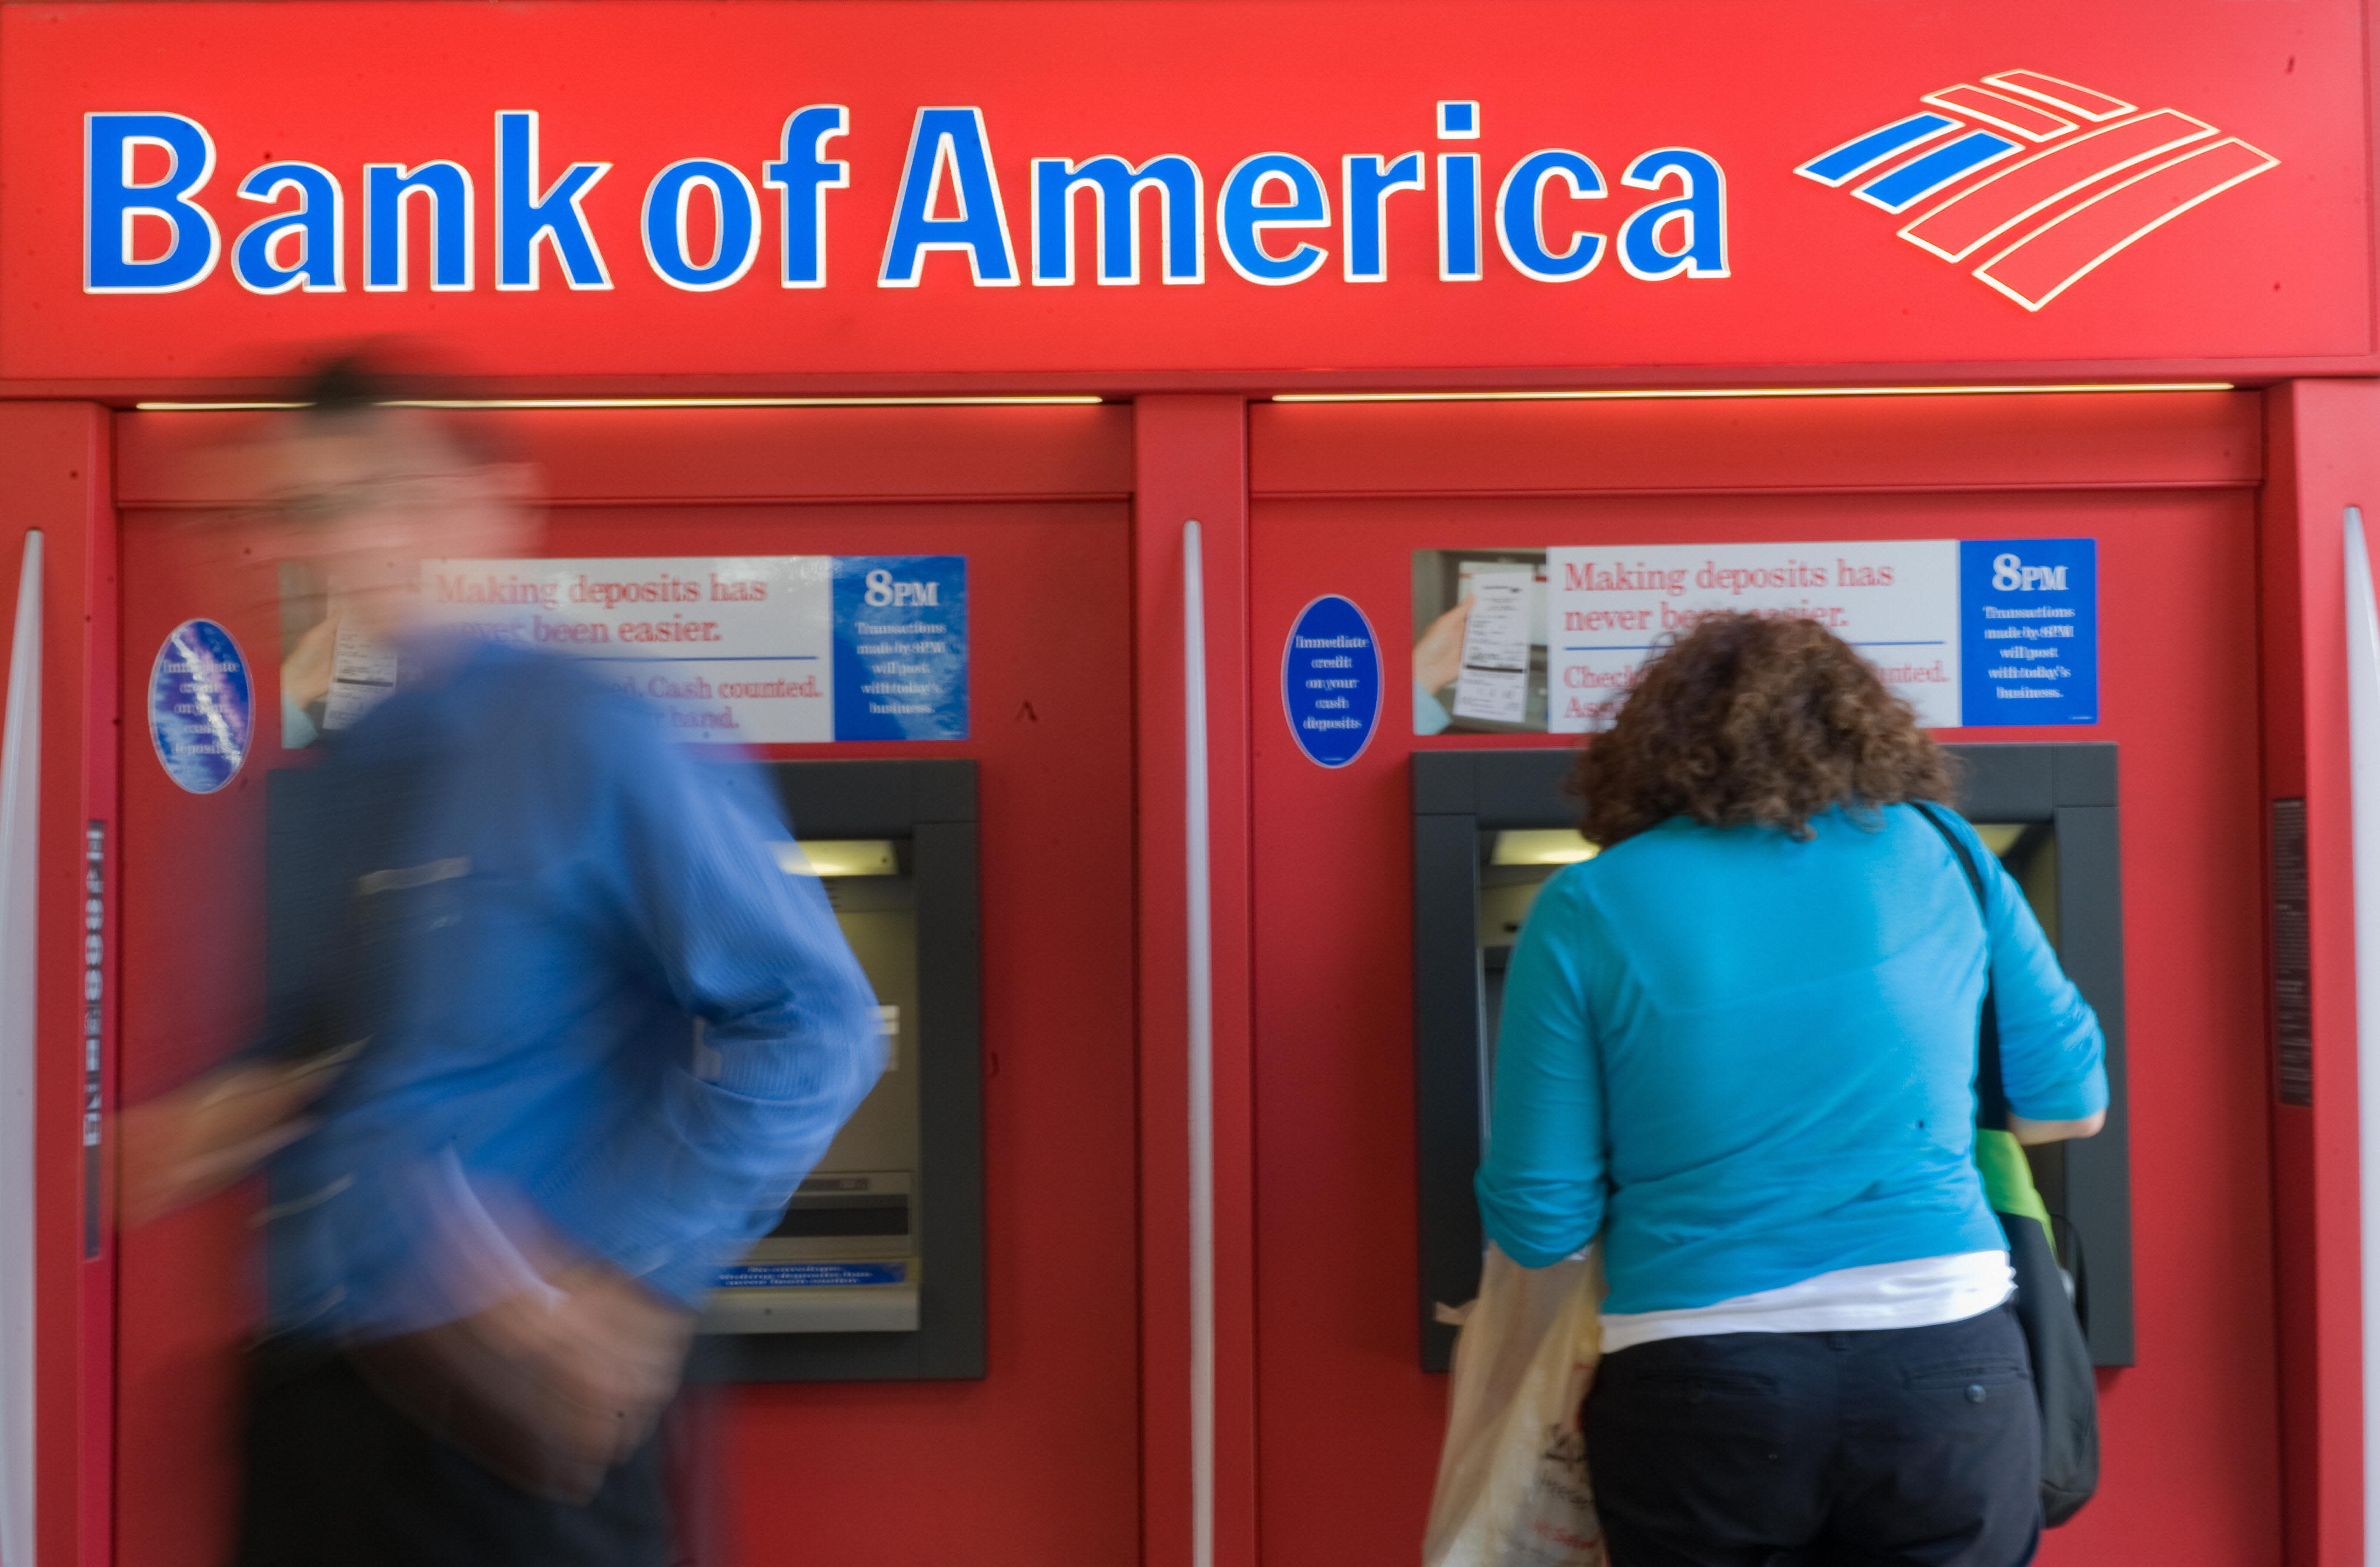 Bank of America is cutting overdraft fees